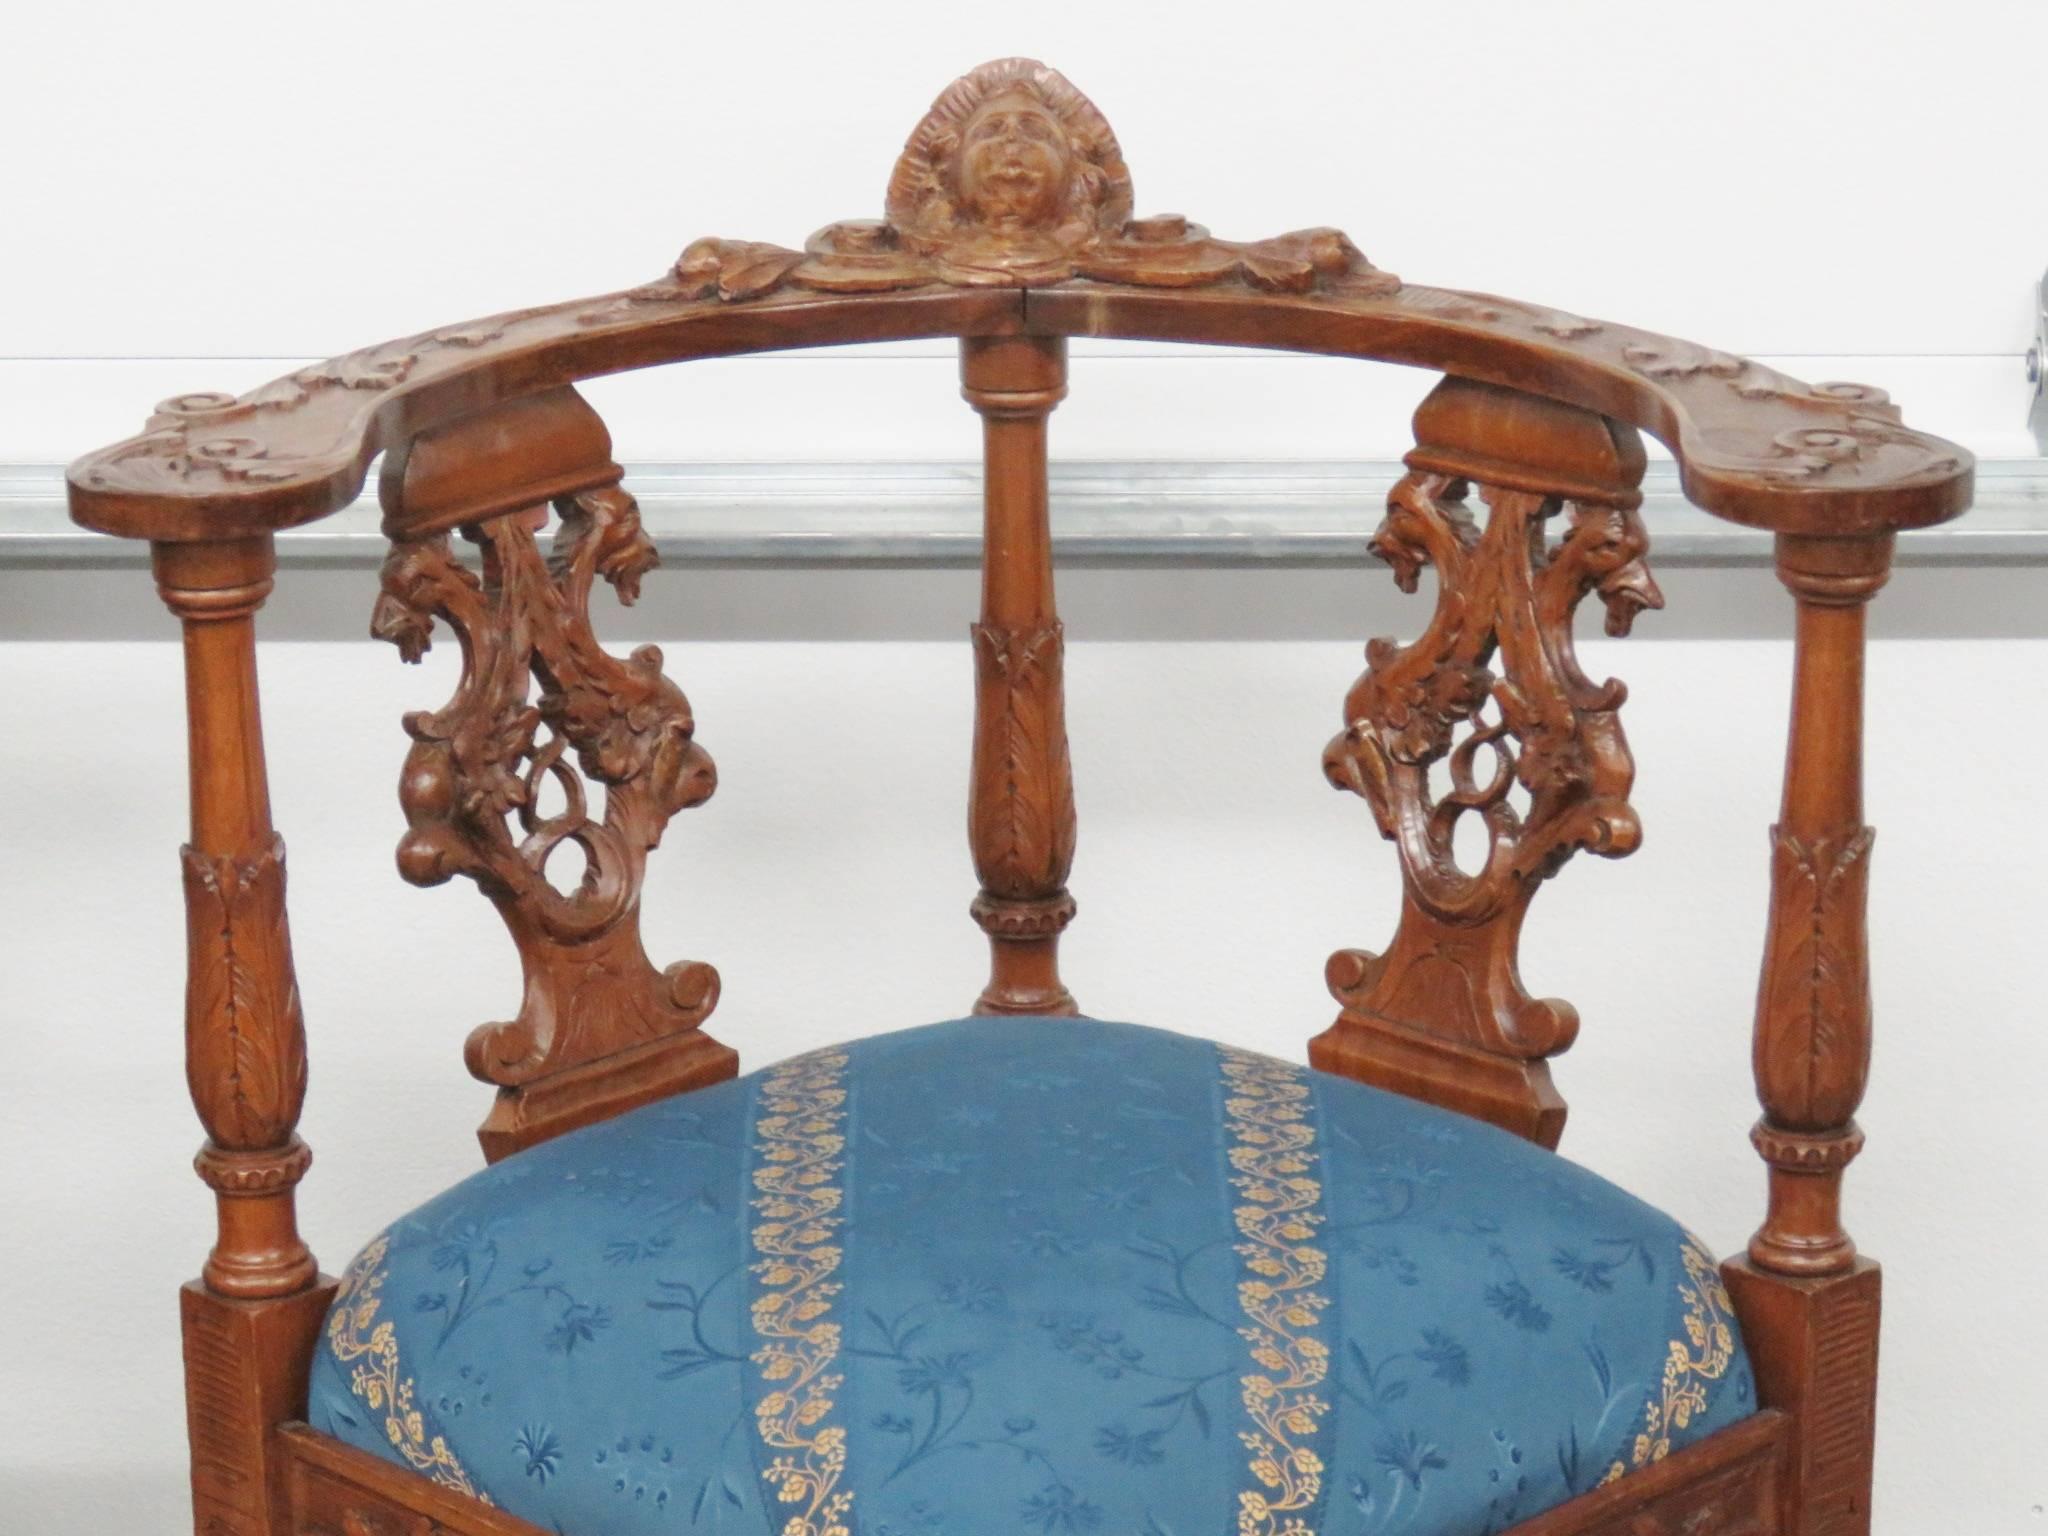 Carved frame with cherubs and upholstered seats.